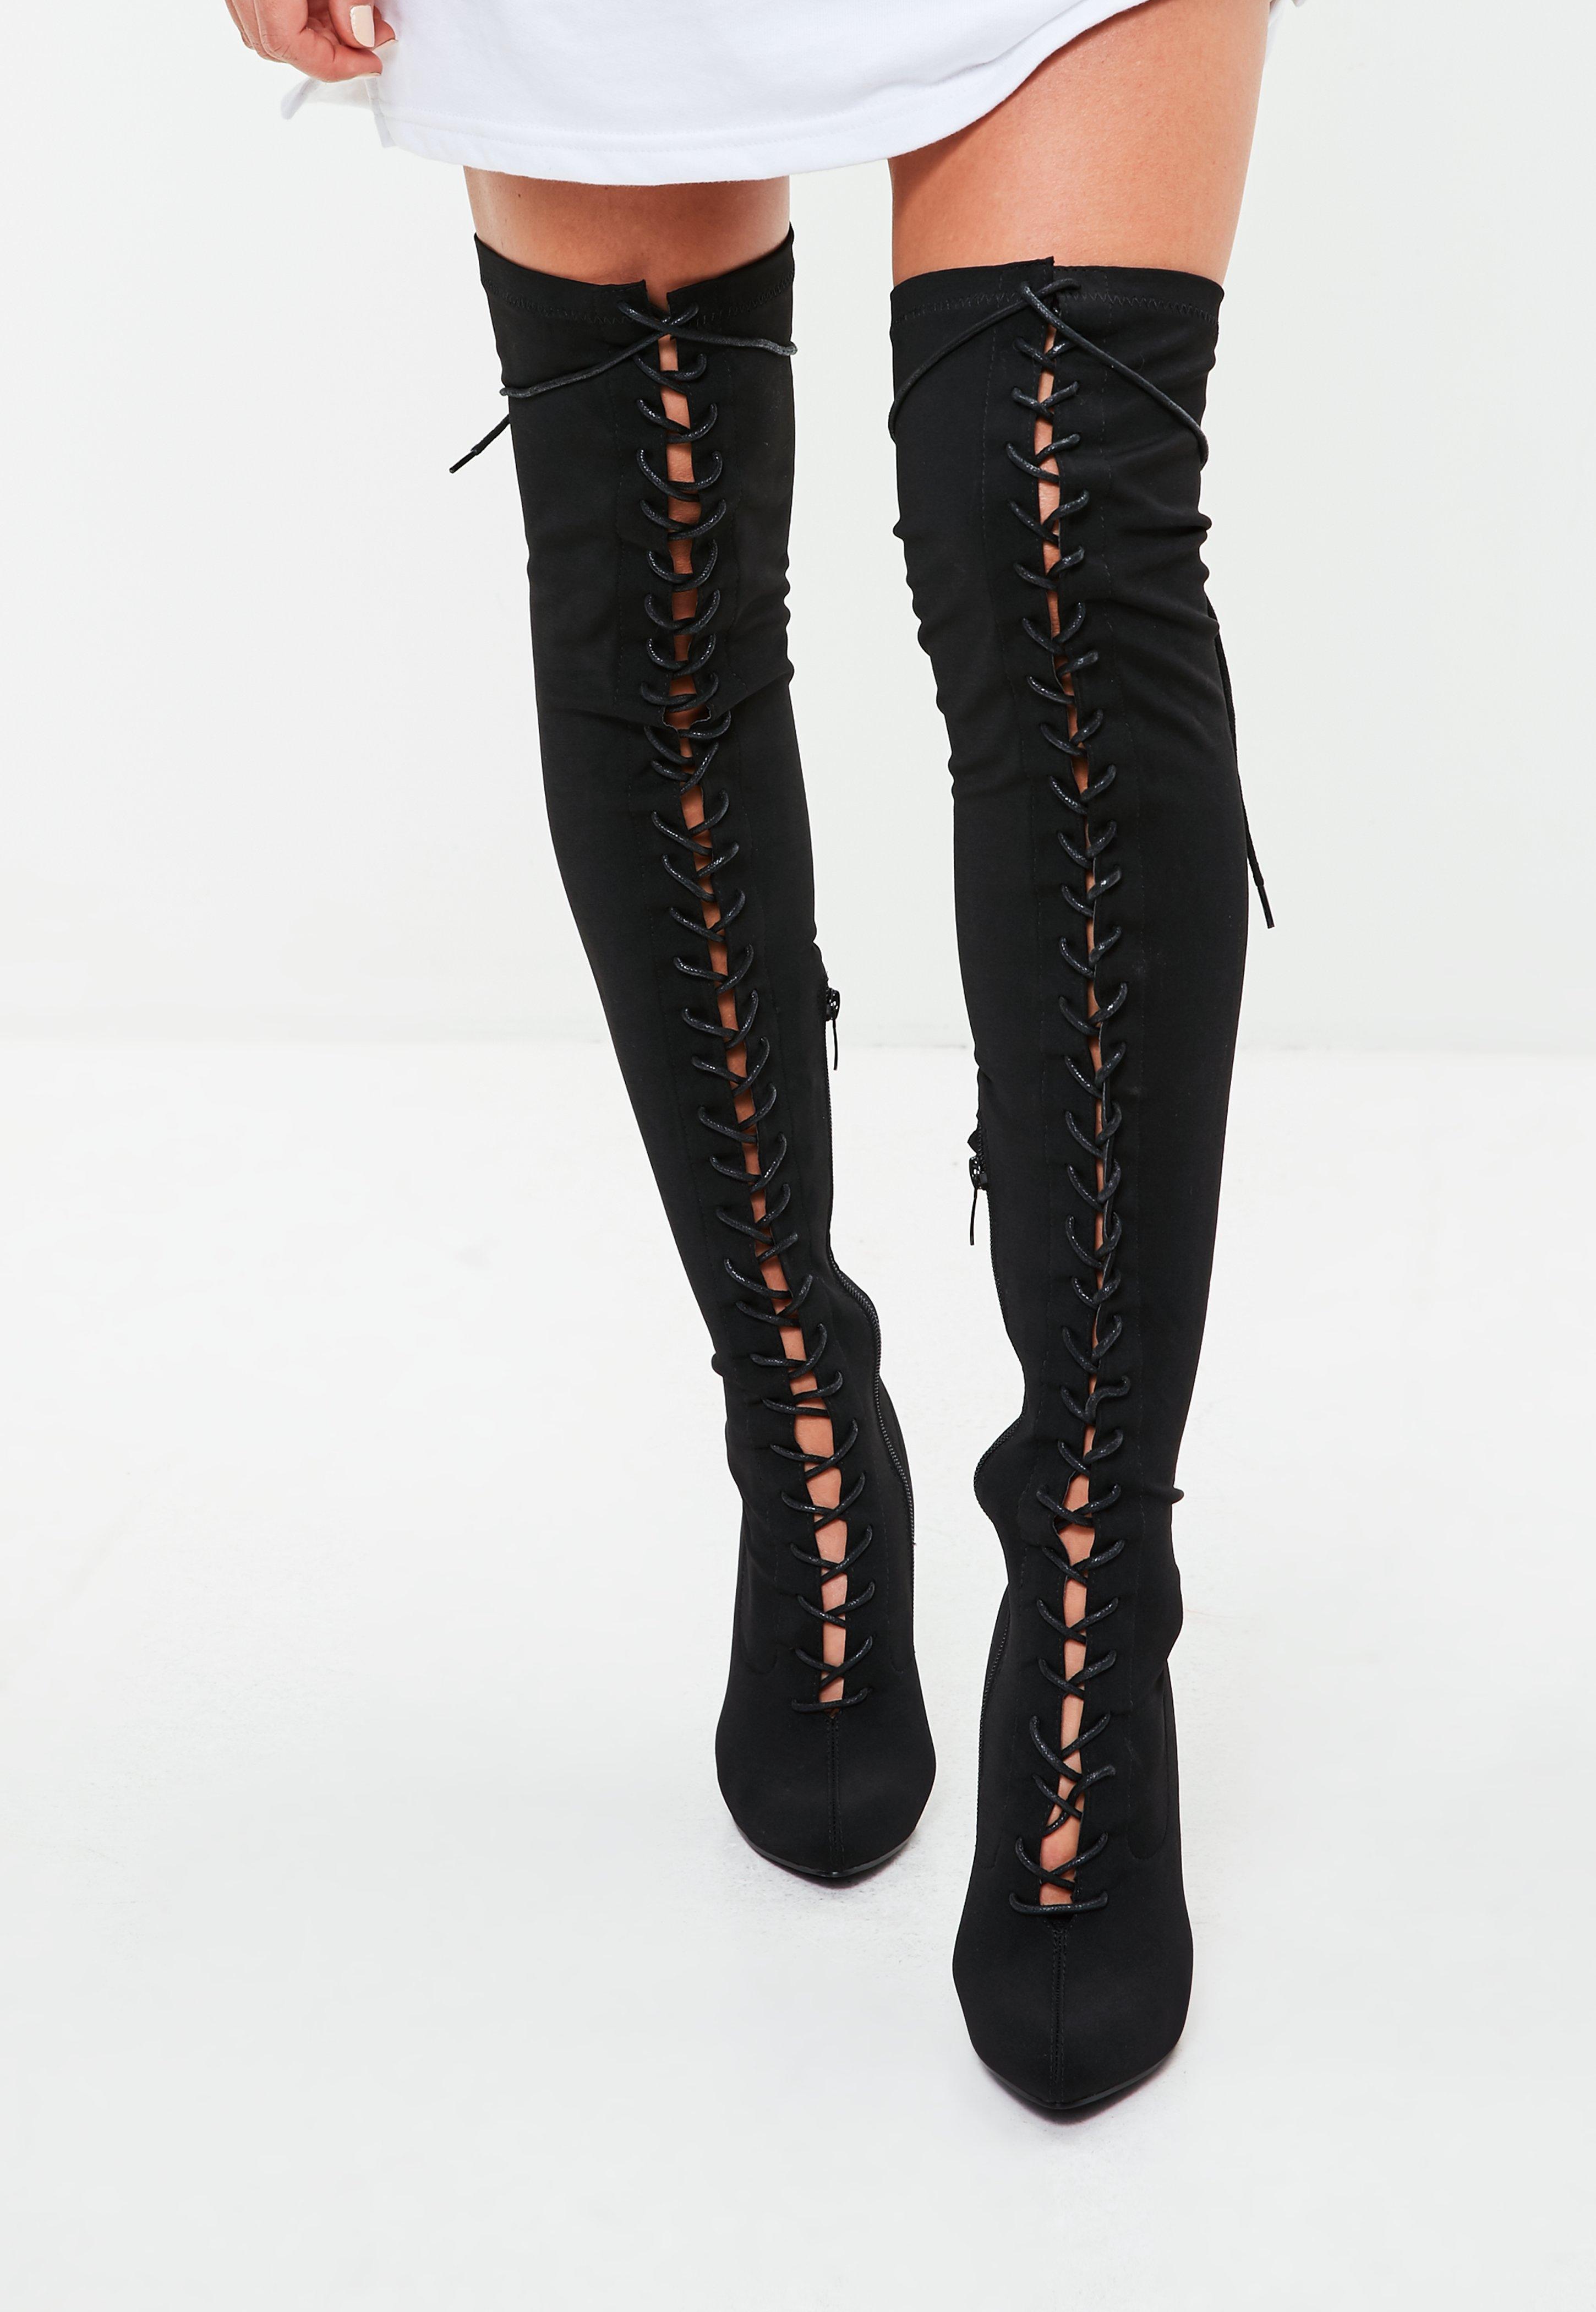 Black Lace Up Over The Knee Boots - Lyst